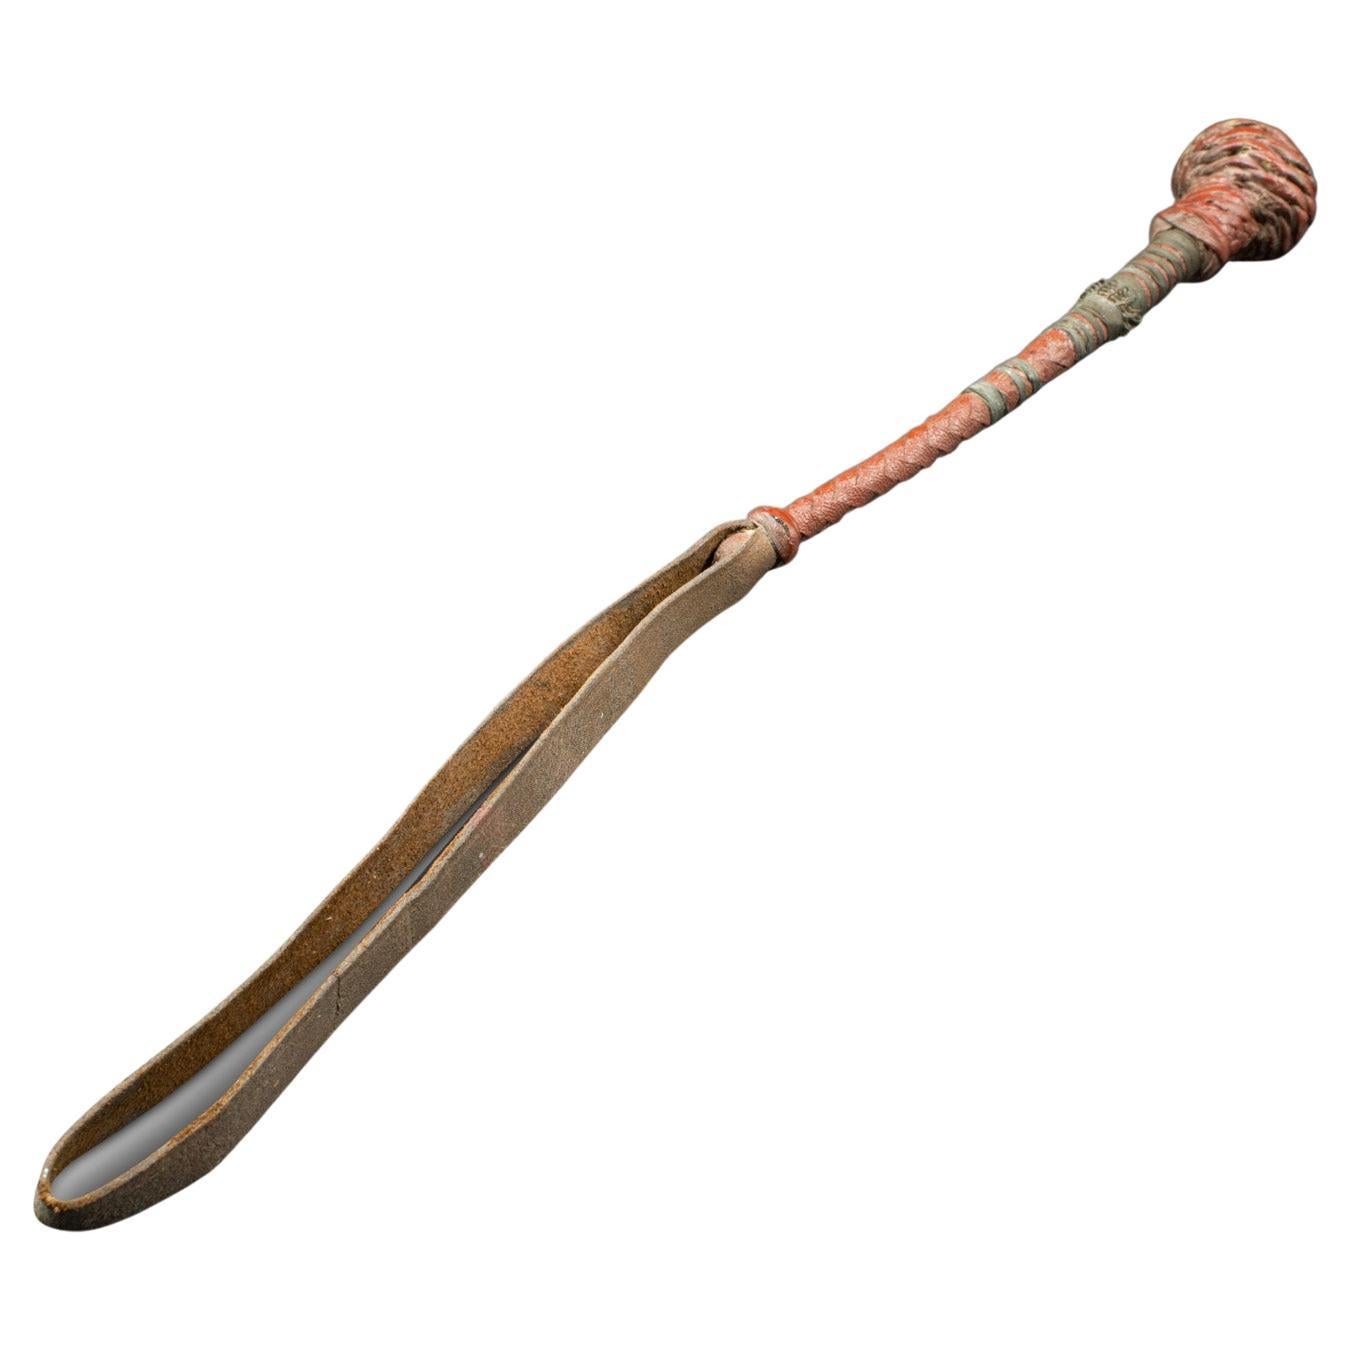 Antique Camel Whip, Arabic, Leather Rider's Crop, Decorative, Victorian, C.1900 For Sale